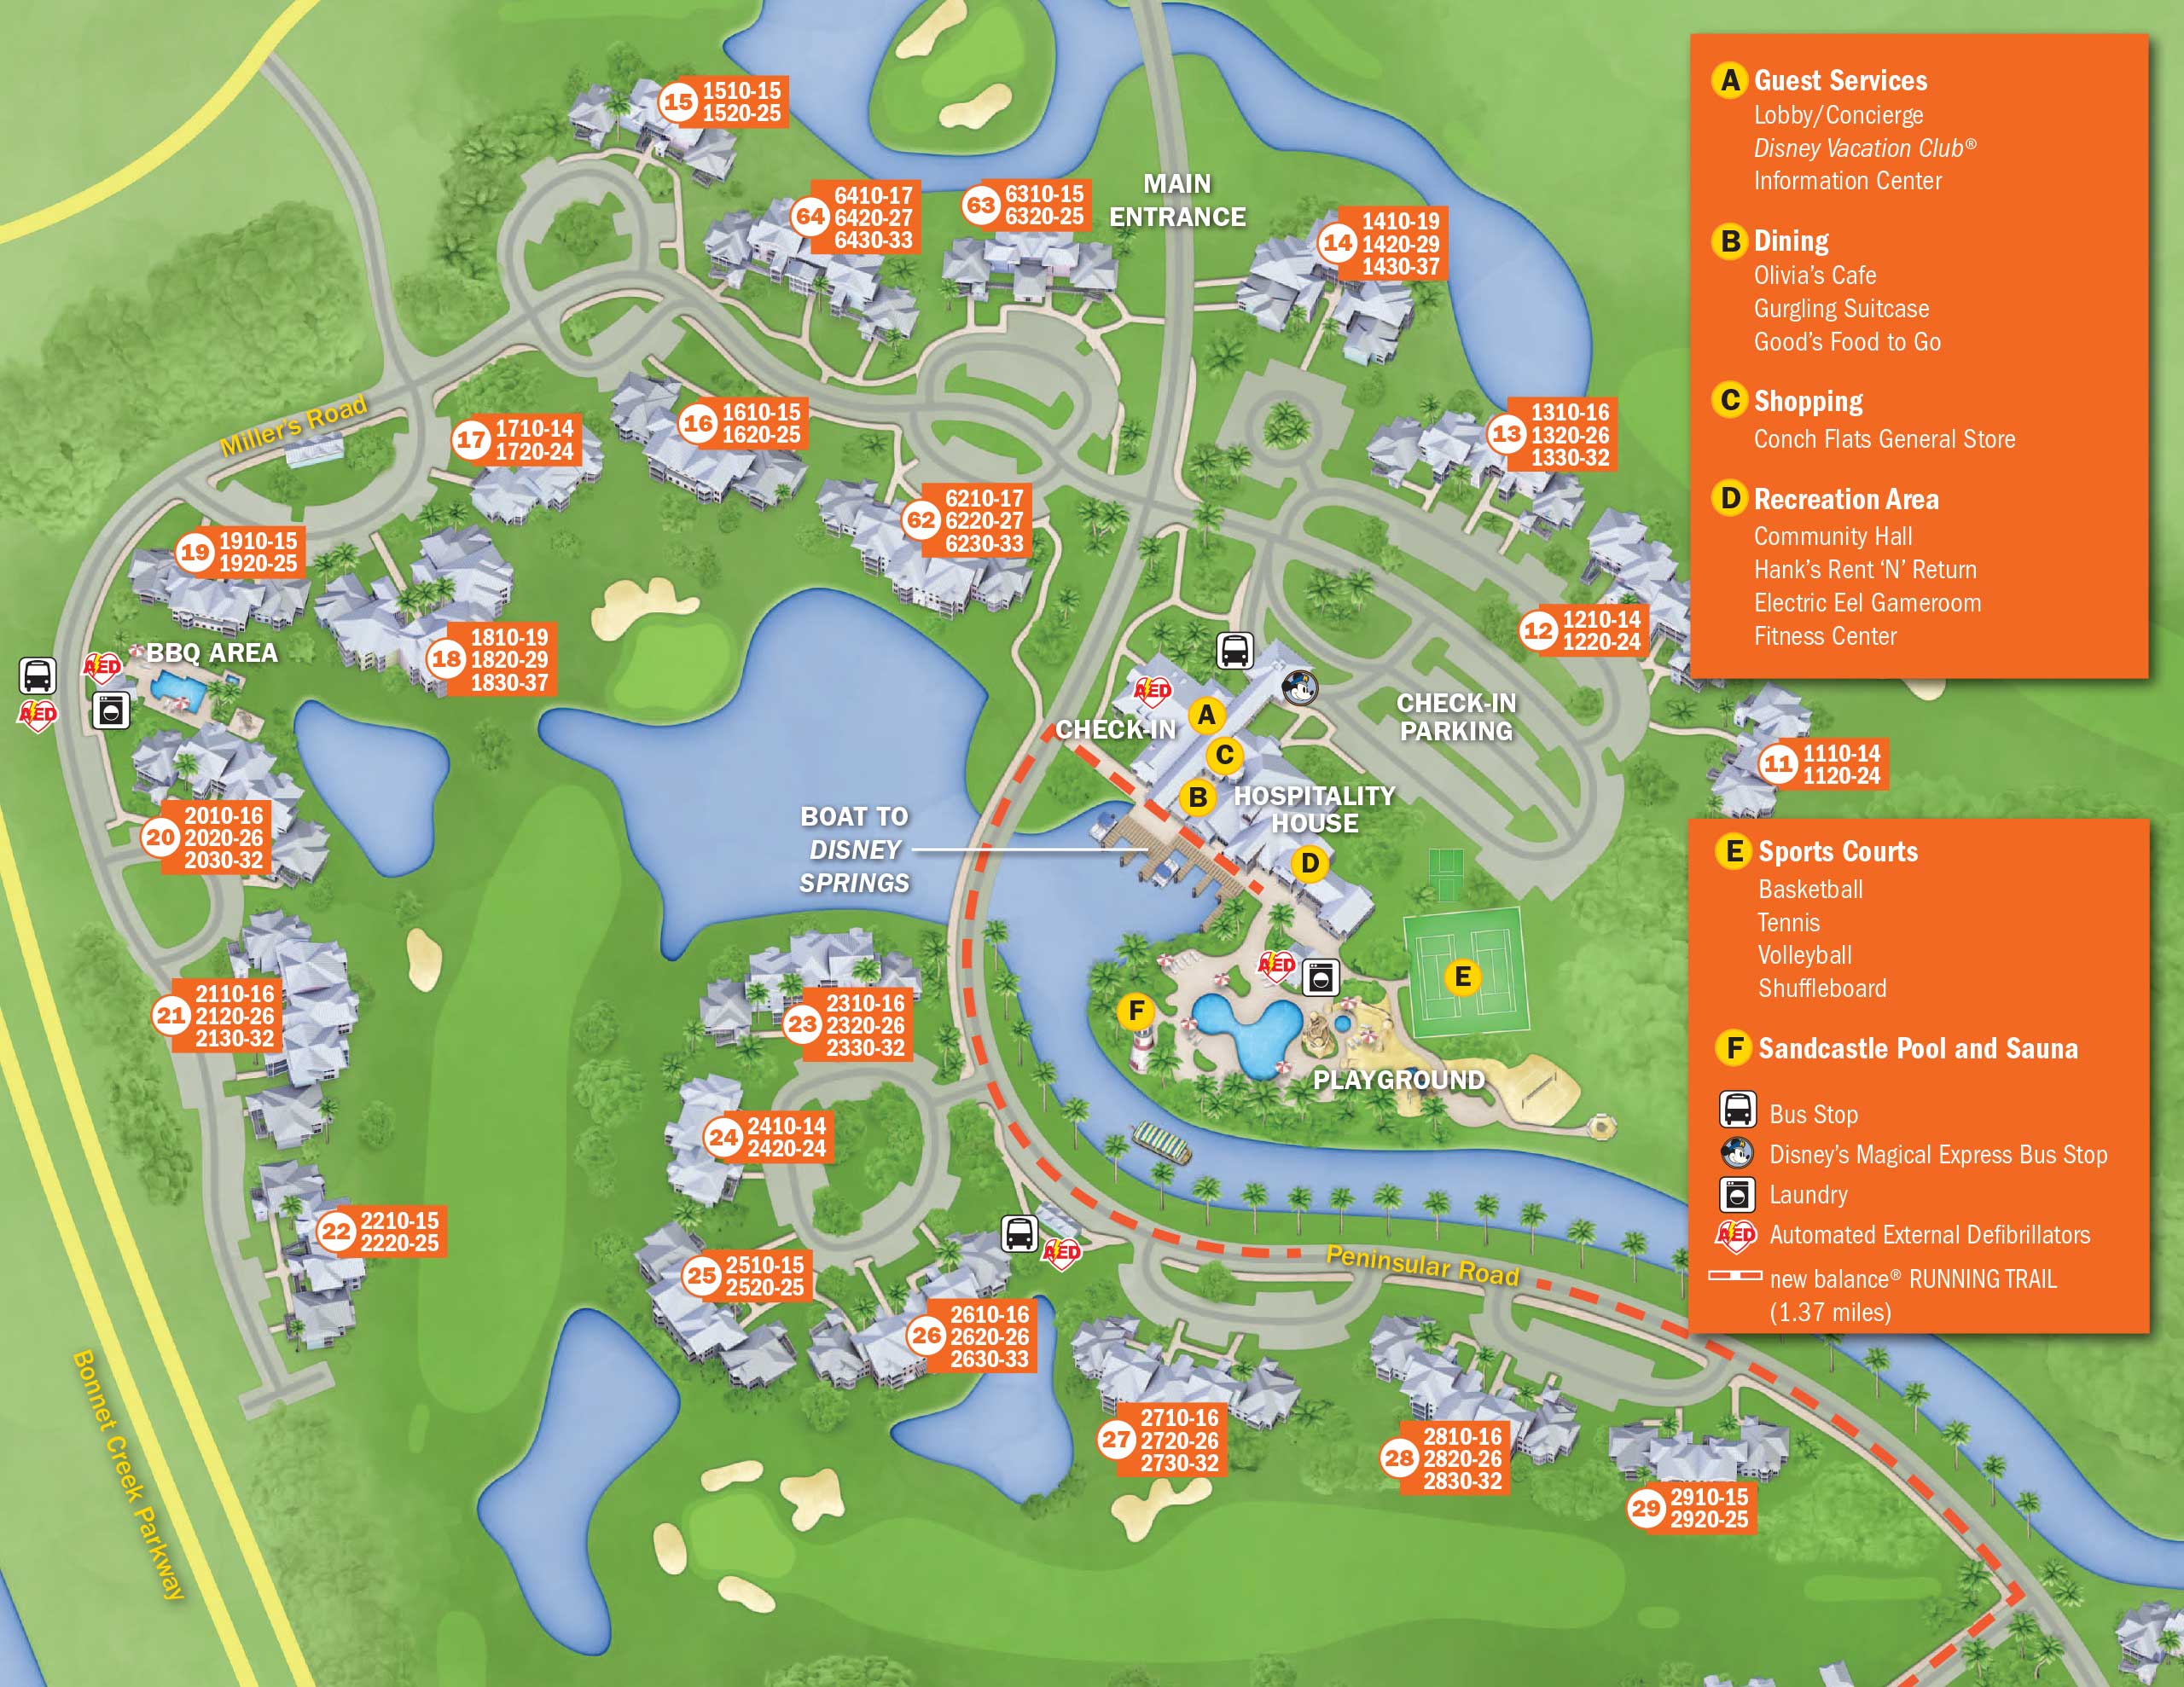 disney world map with hotels April 2017 Walt Disney World Resort Hotel Maps Photo 27 Of 33 disney world map with hotels